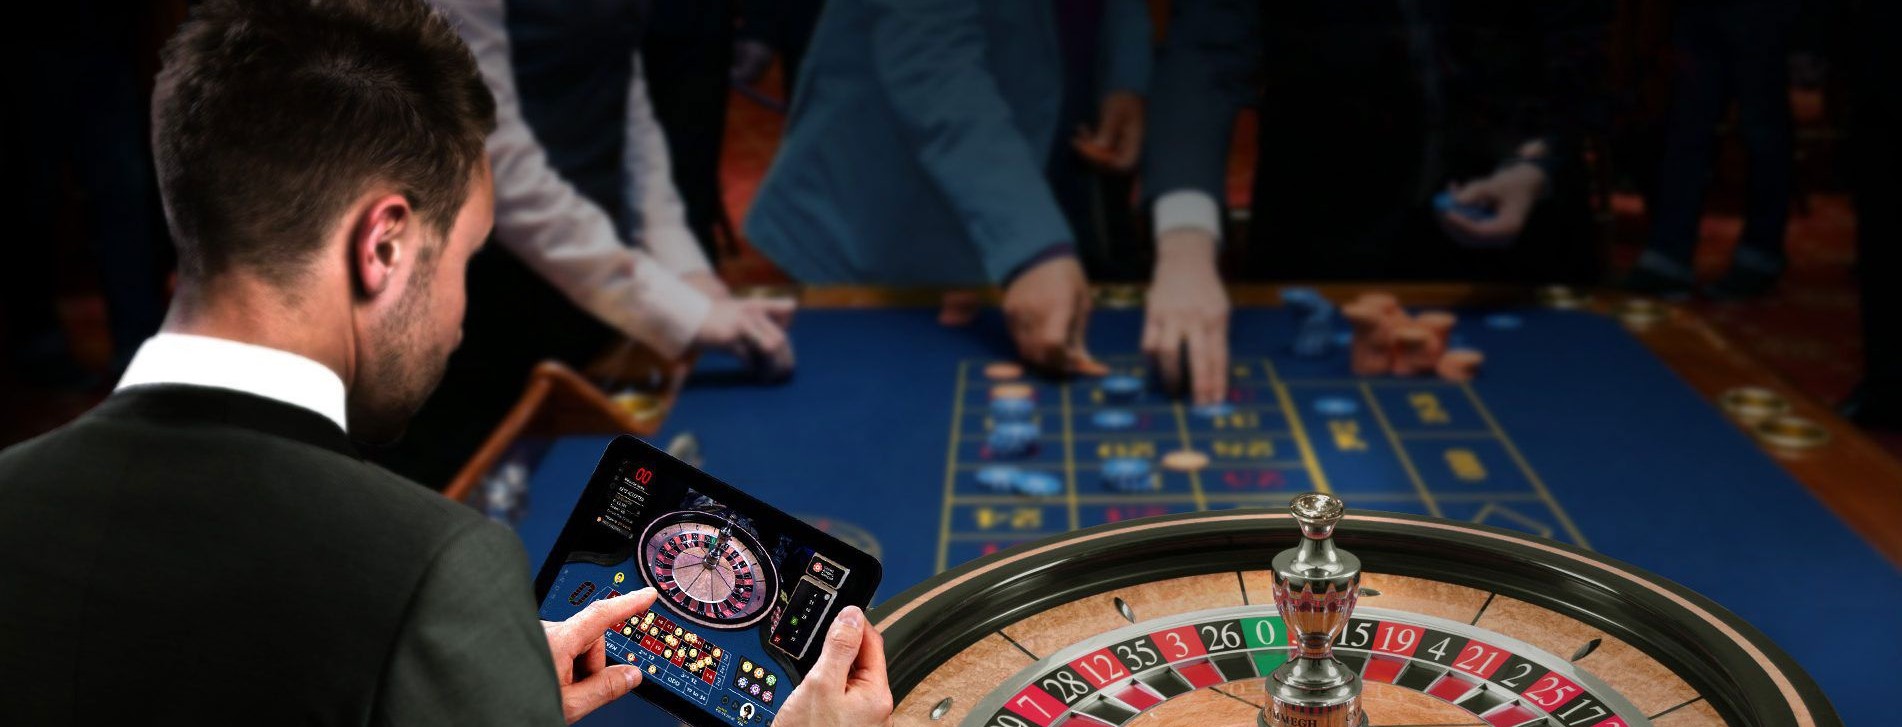 roulette being played